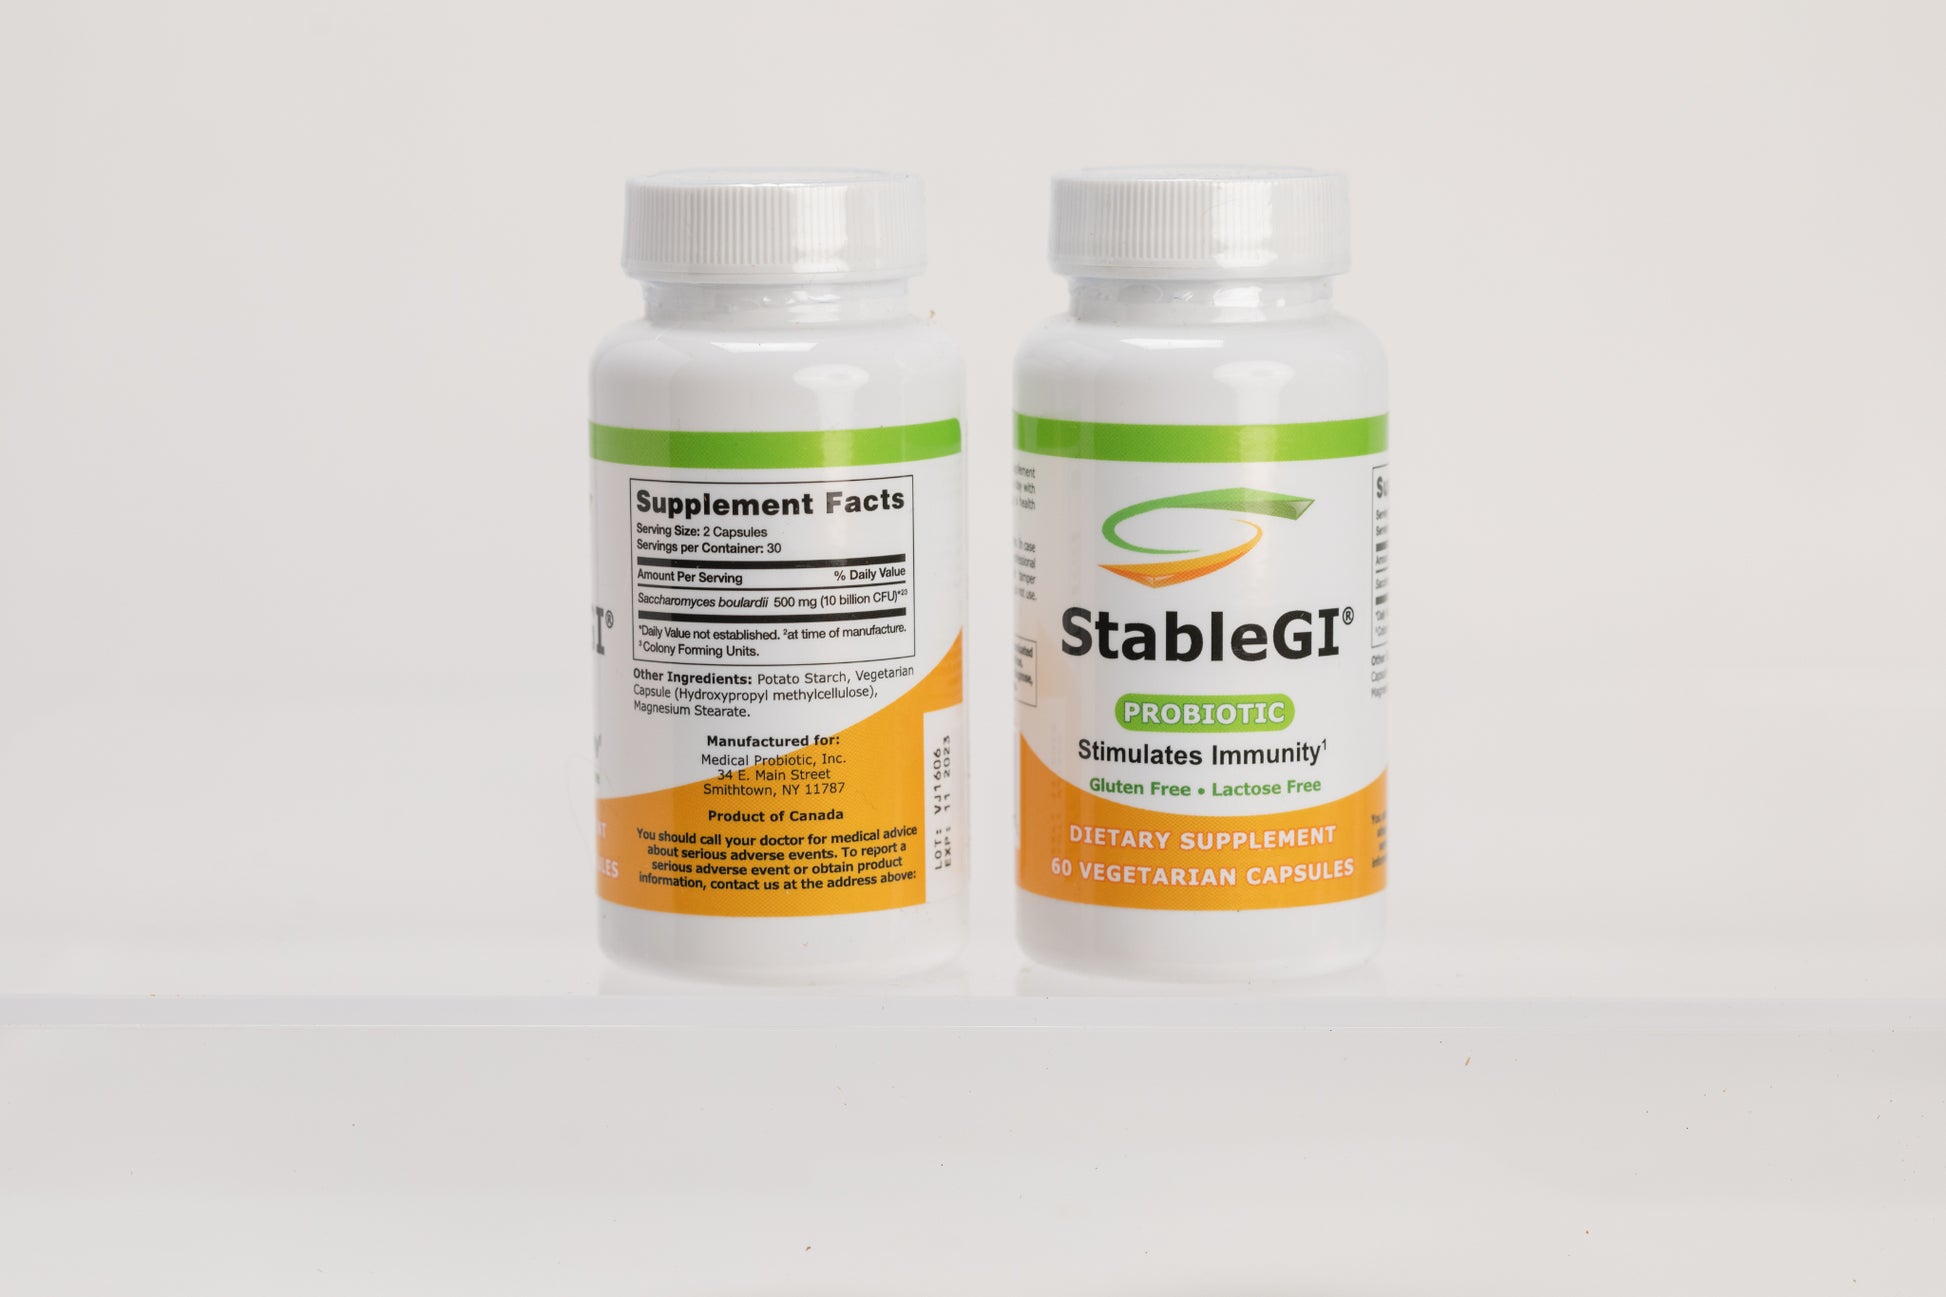 A picture of 2 bottles of StableGI probiotic showing the front  label on one bottle and the supplement facts panel